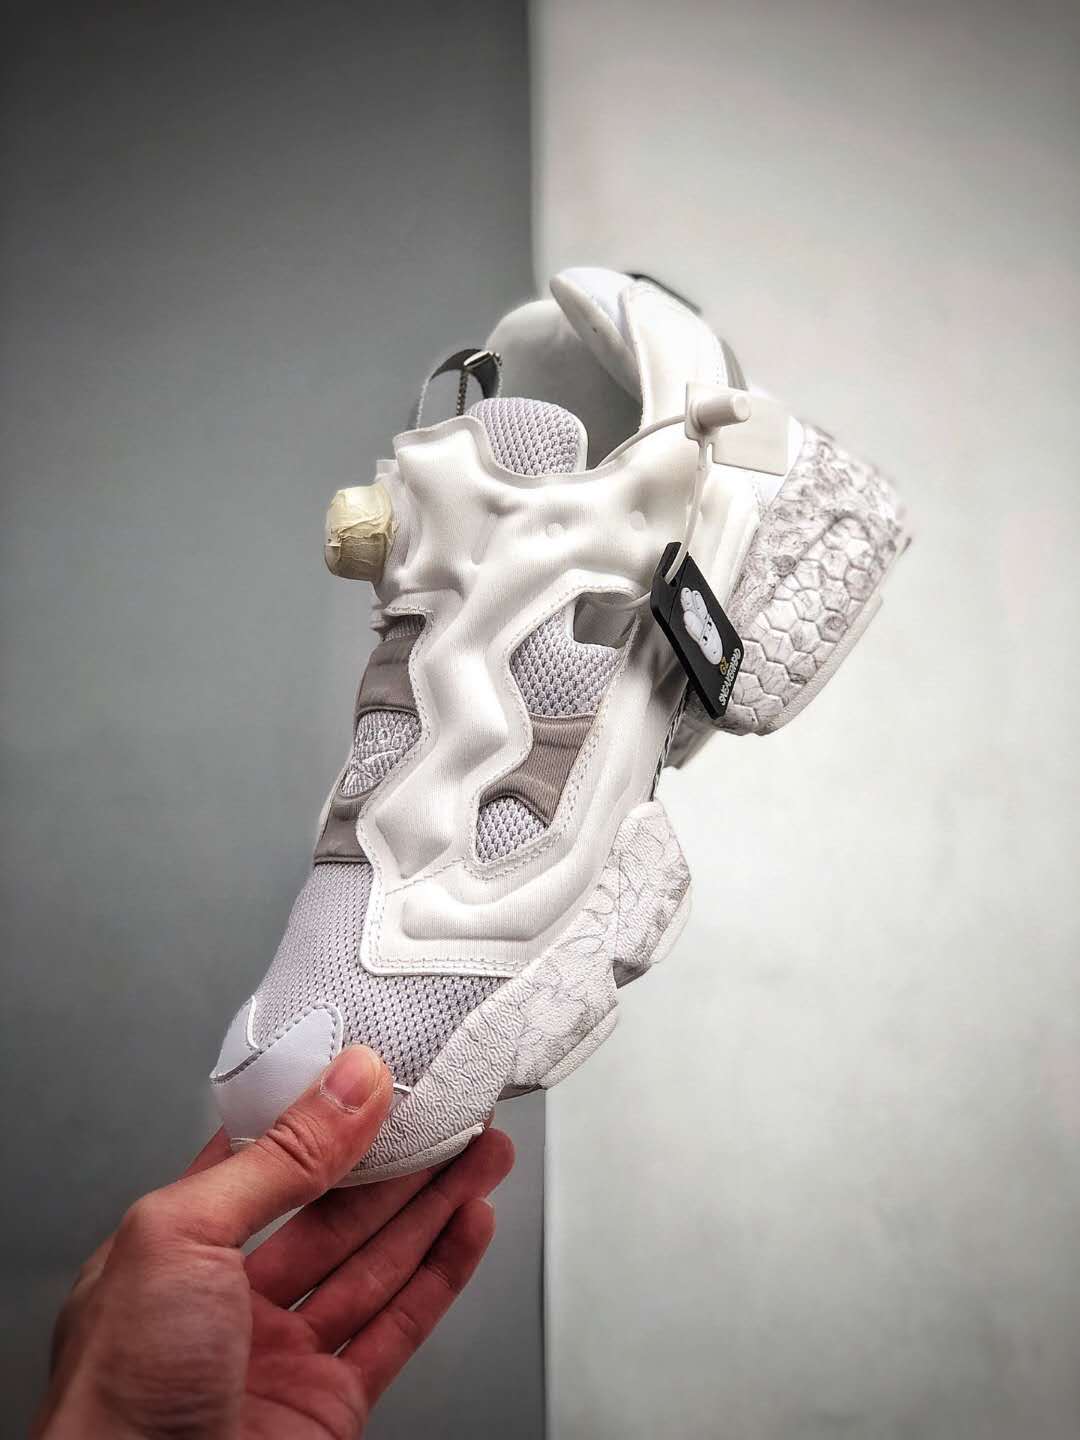 Reebok Instapump Fury Achm Running Shoes White BD1550 - Lightweight and Stylish Footwear